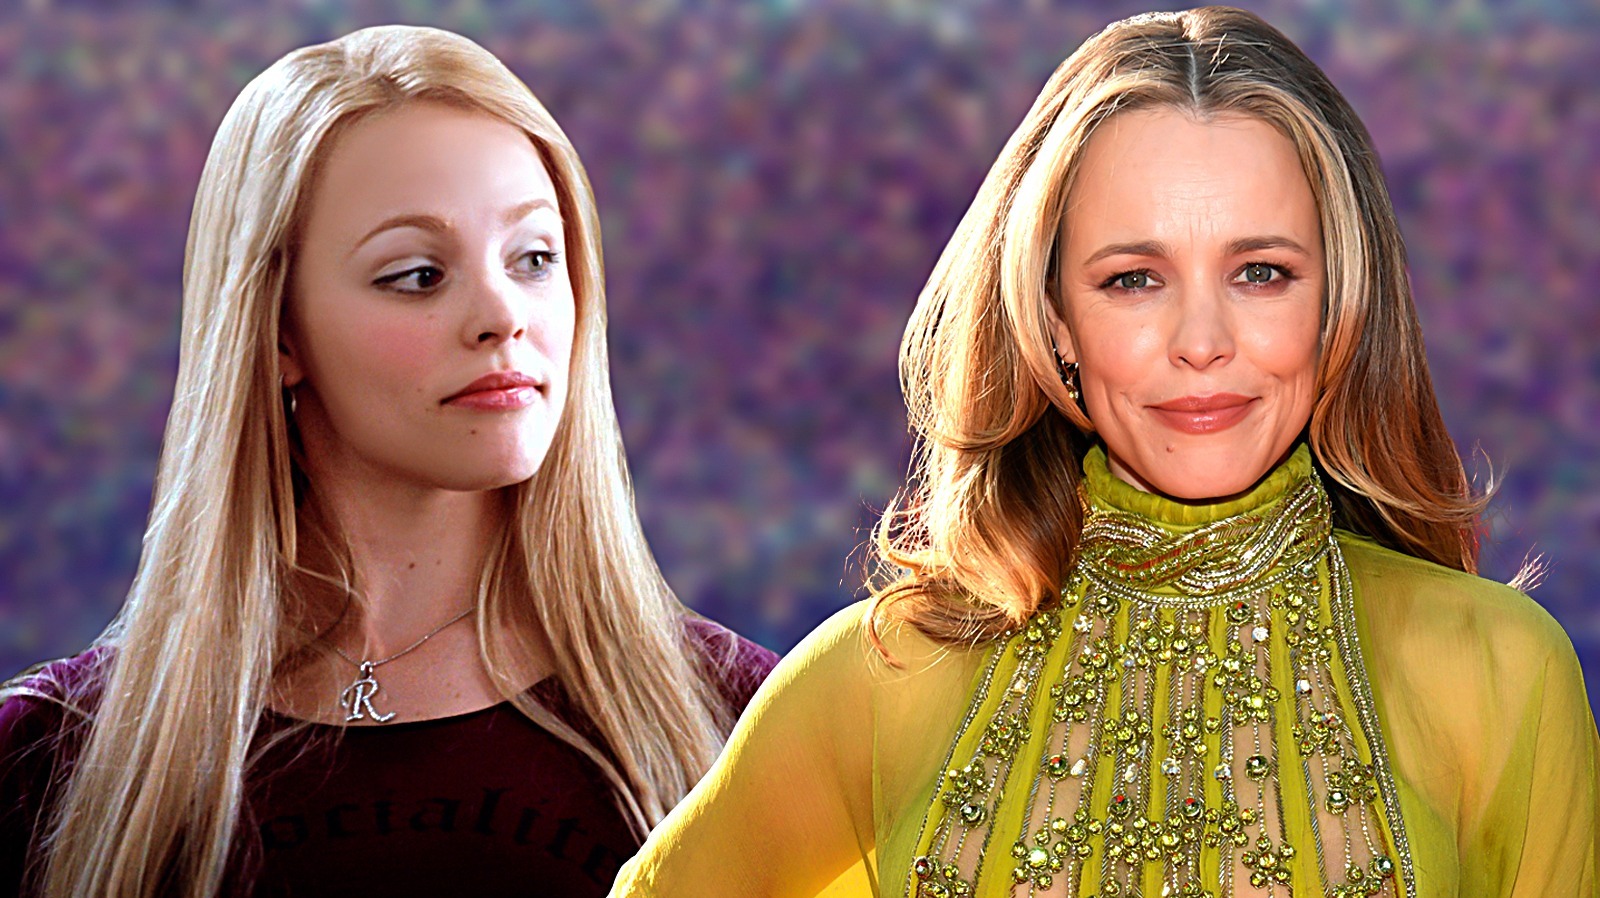 Rachel McAdams Says She's Down for the New 'Mean Girls' Movie